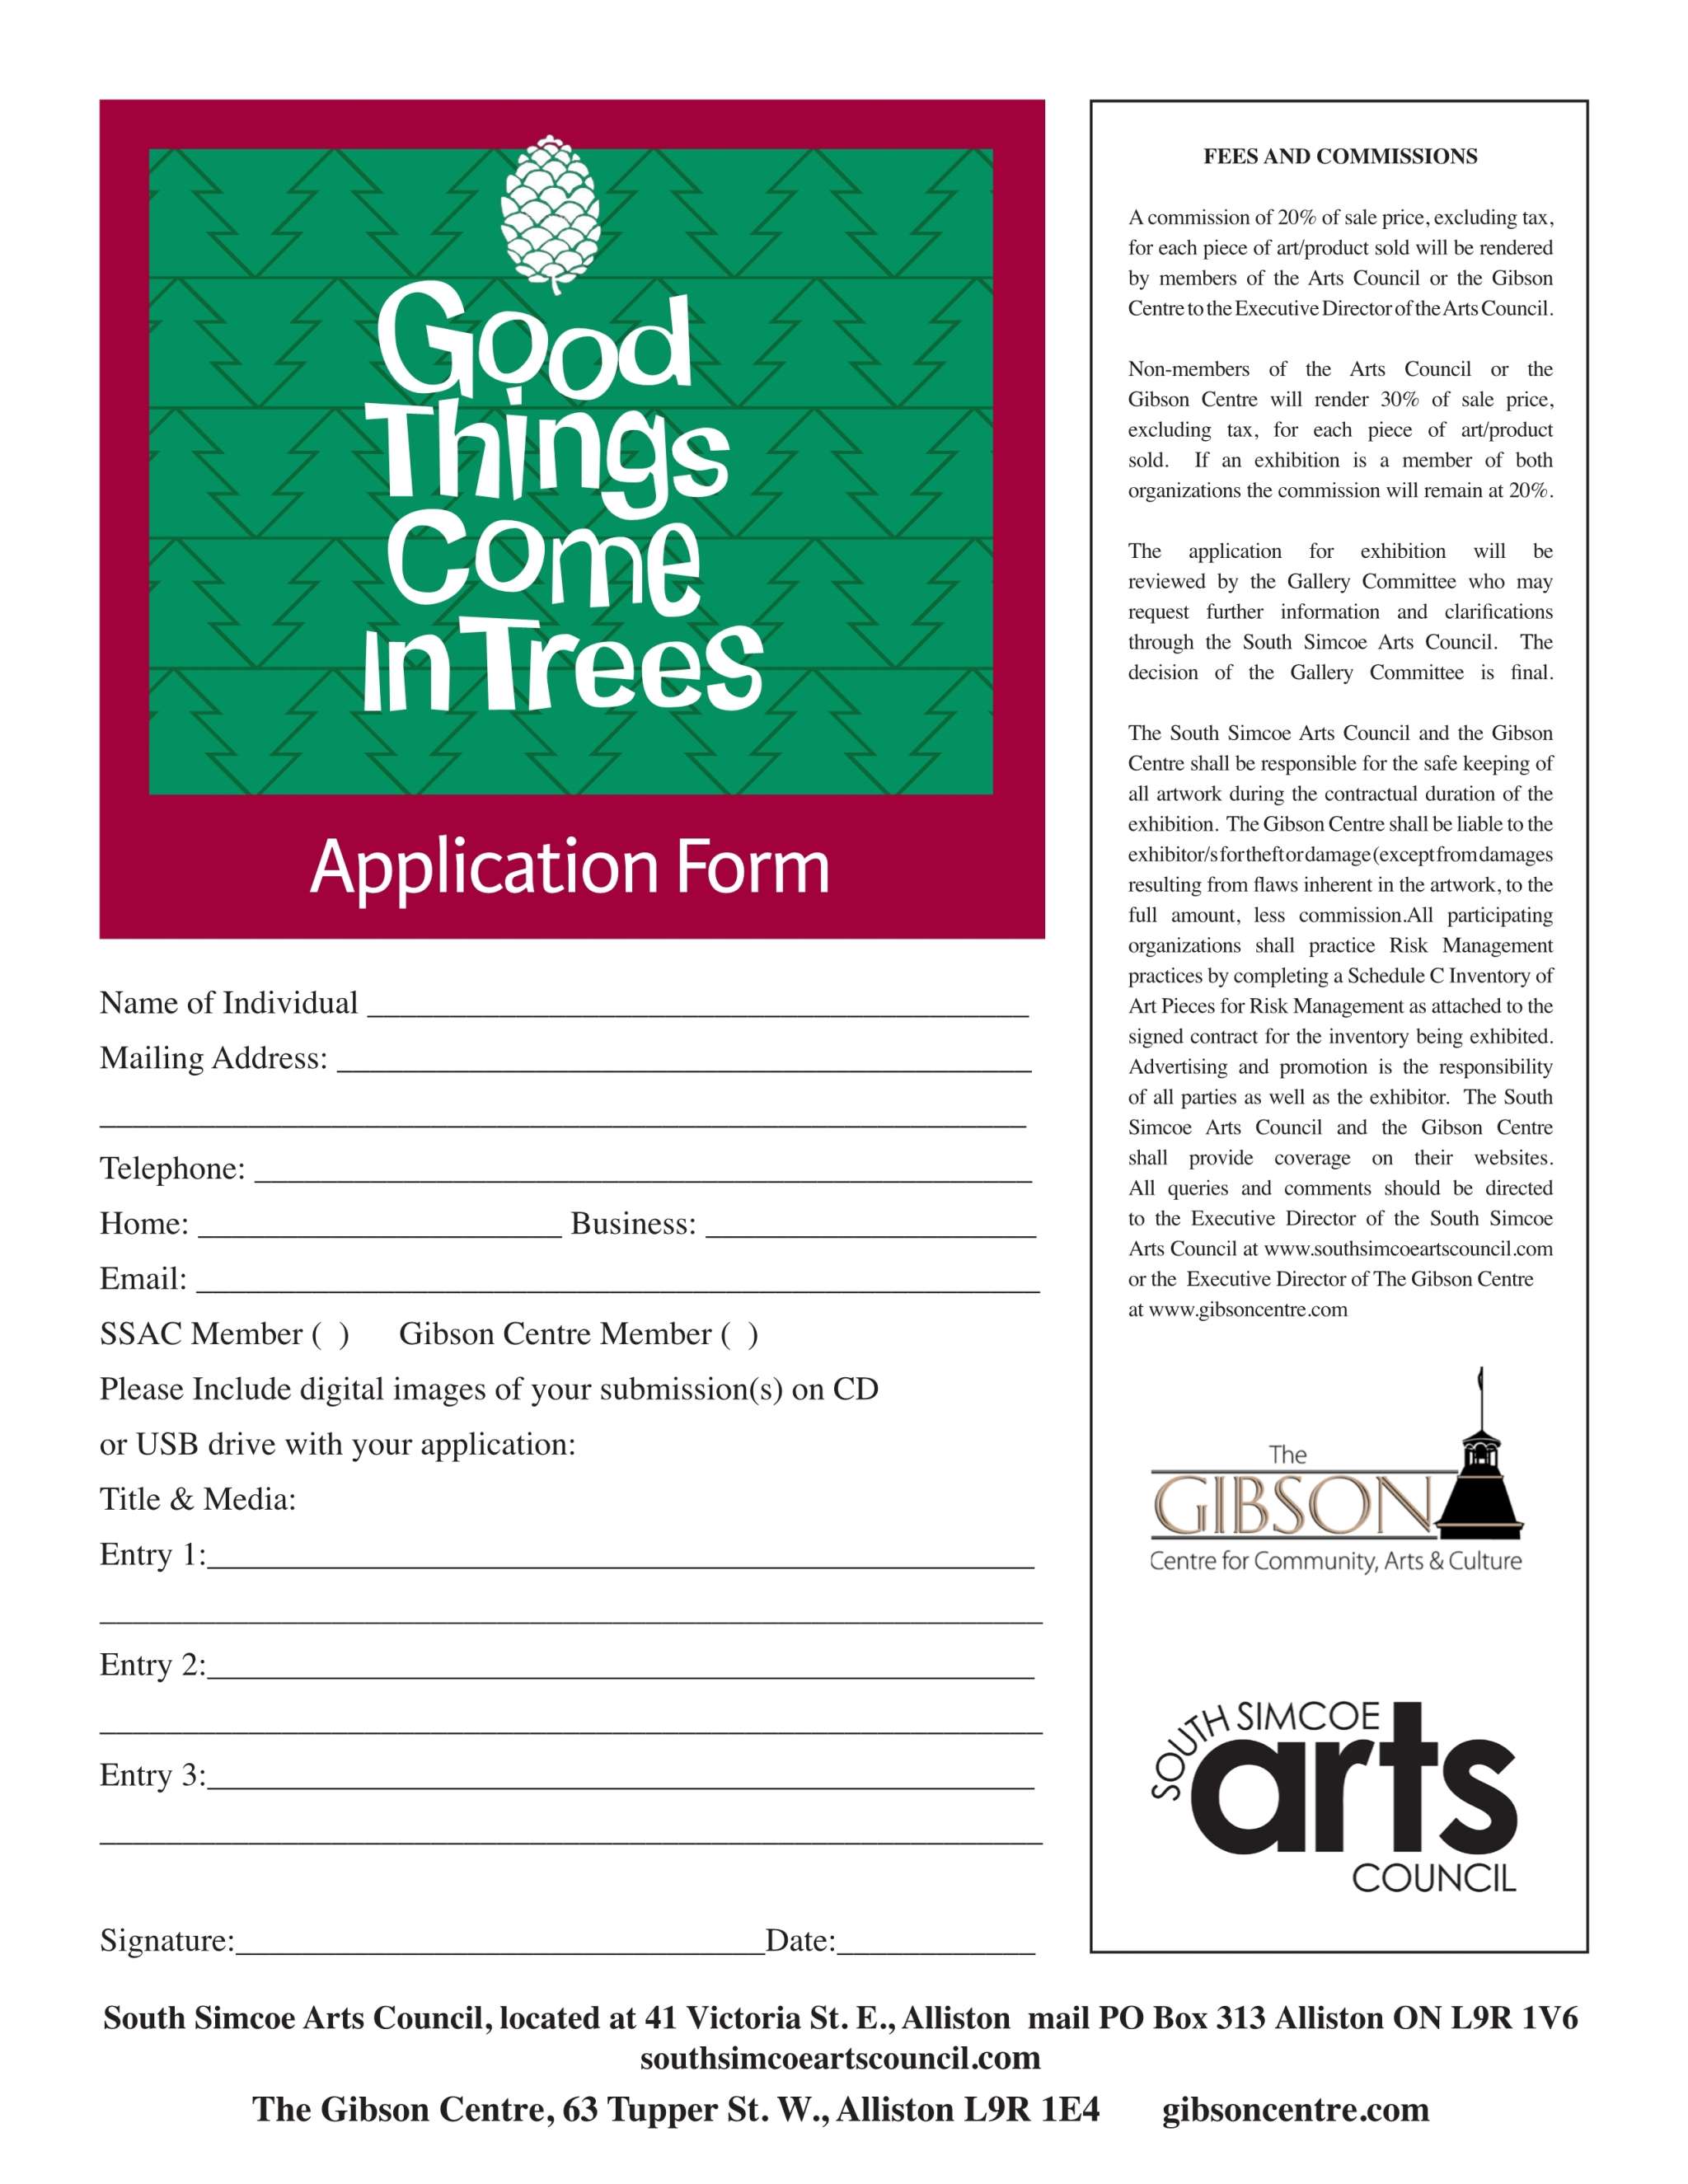 Good Things Come in Trees - Application - pg1